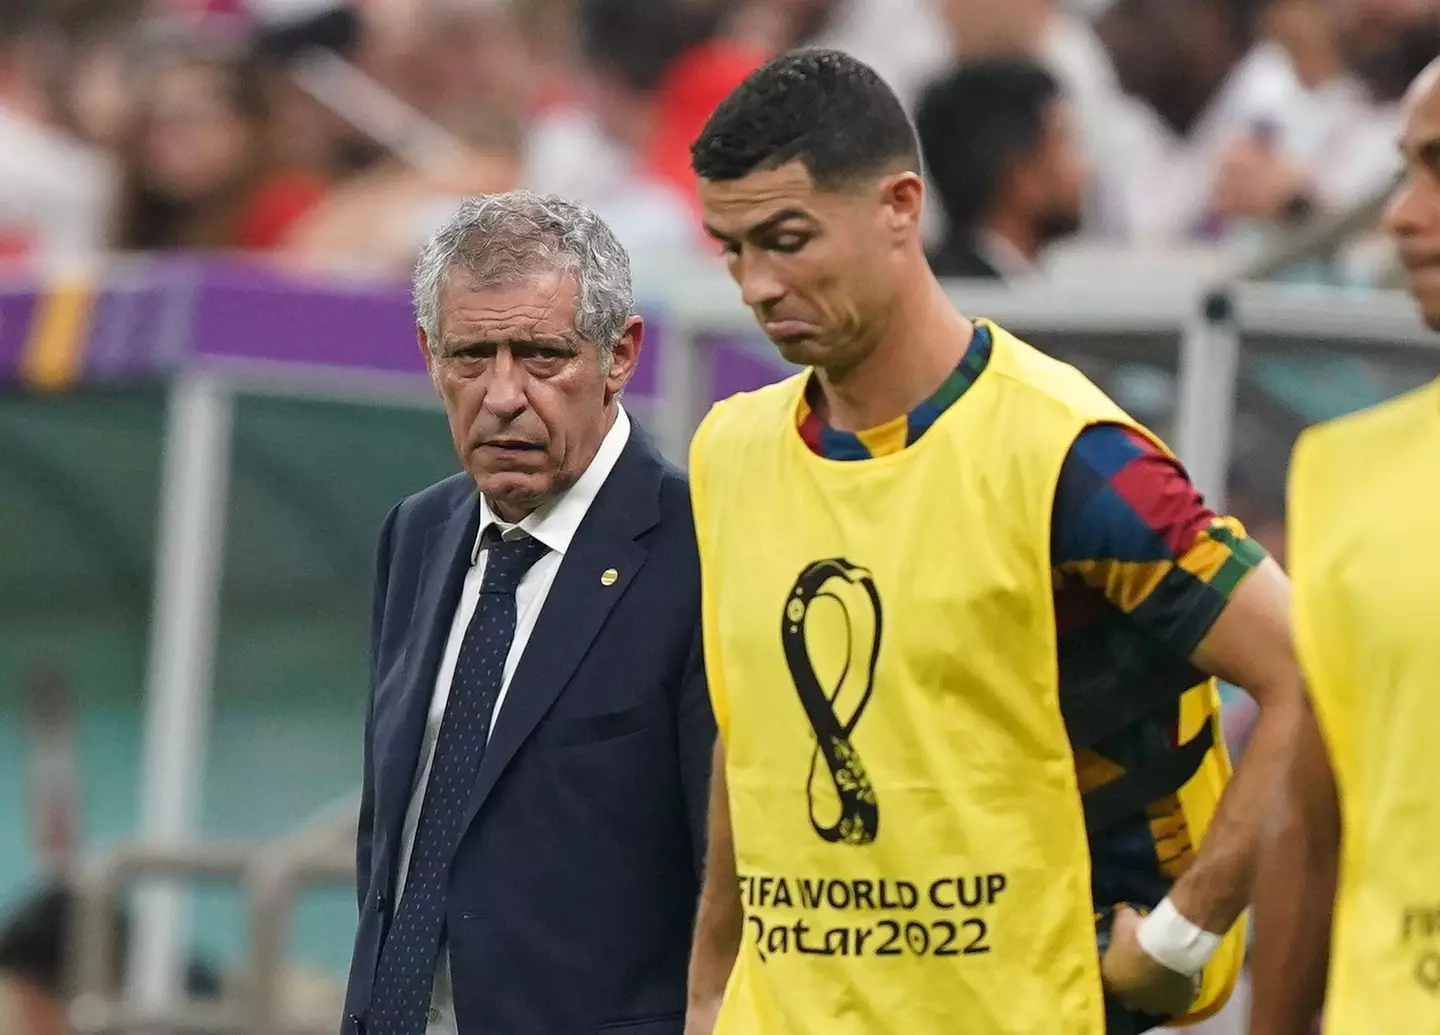 Fernando Santos controversially dropped Cristiano Ronaldo from the Portugal starting XI during the World Cup in Qatar.